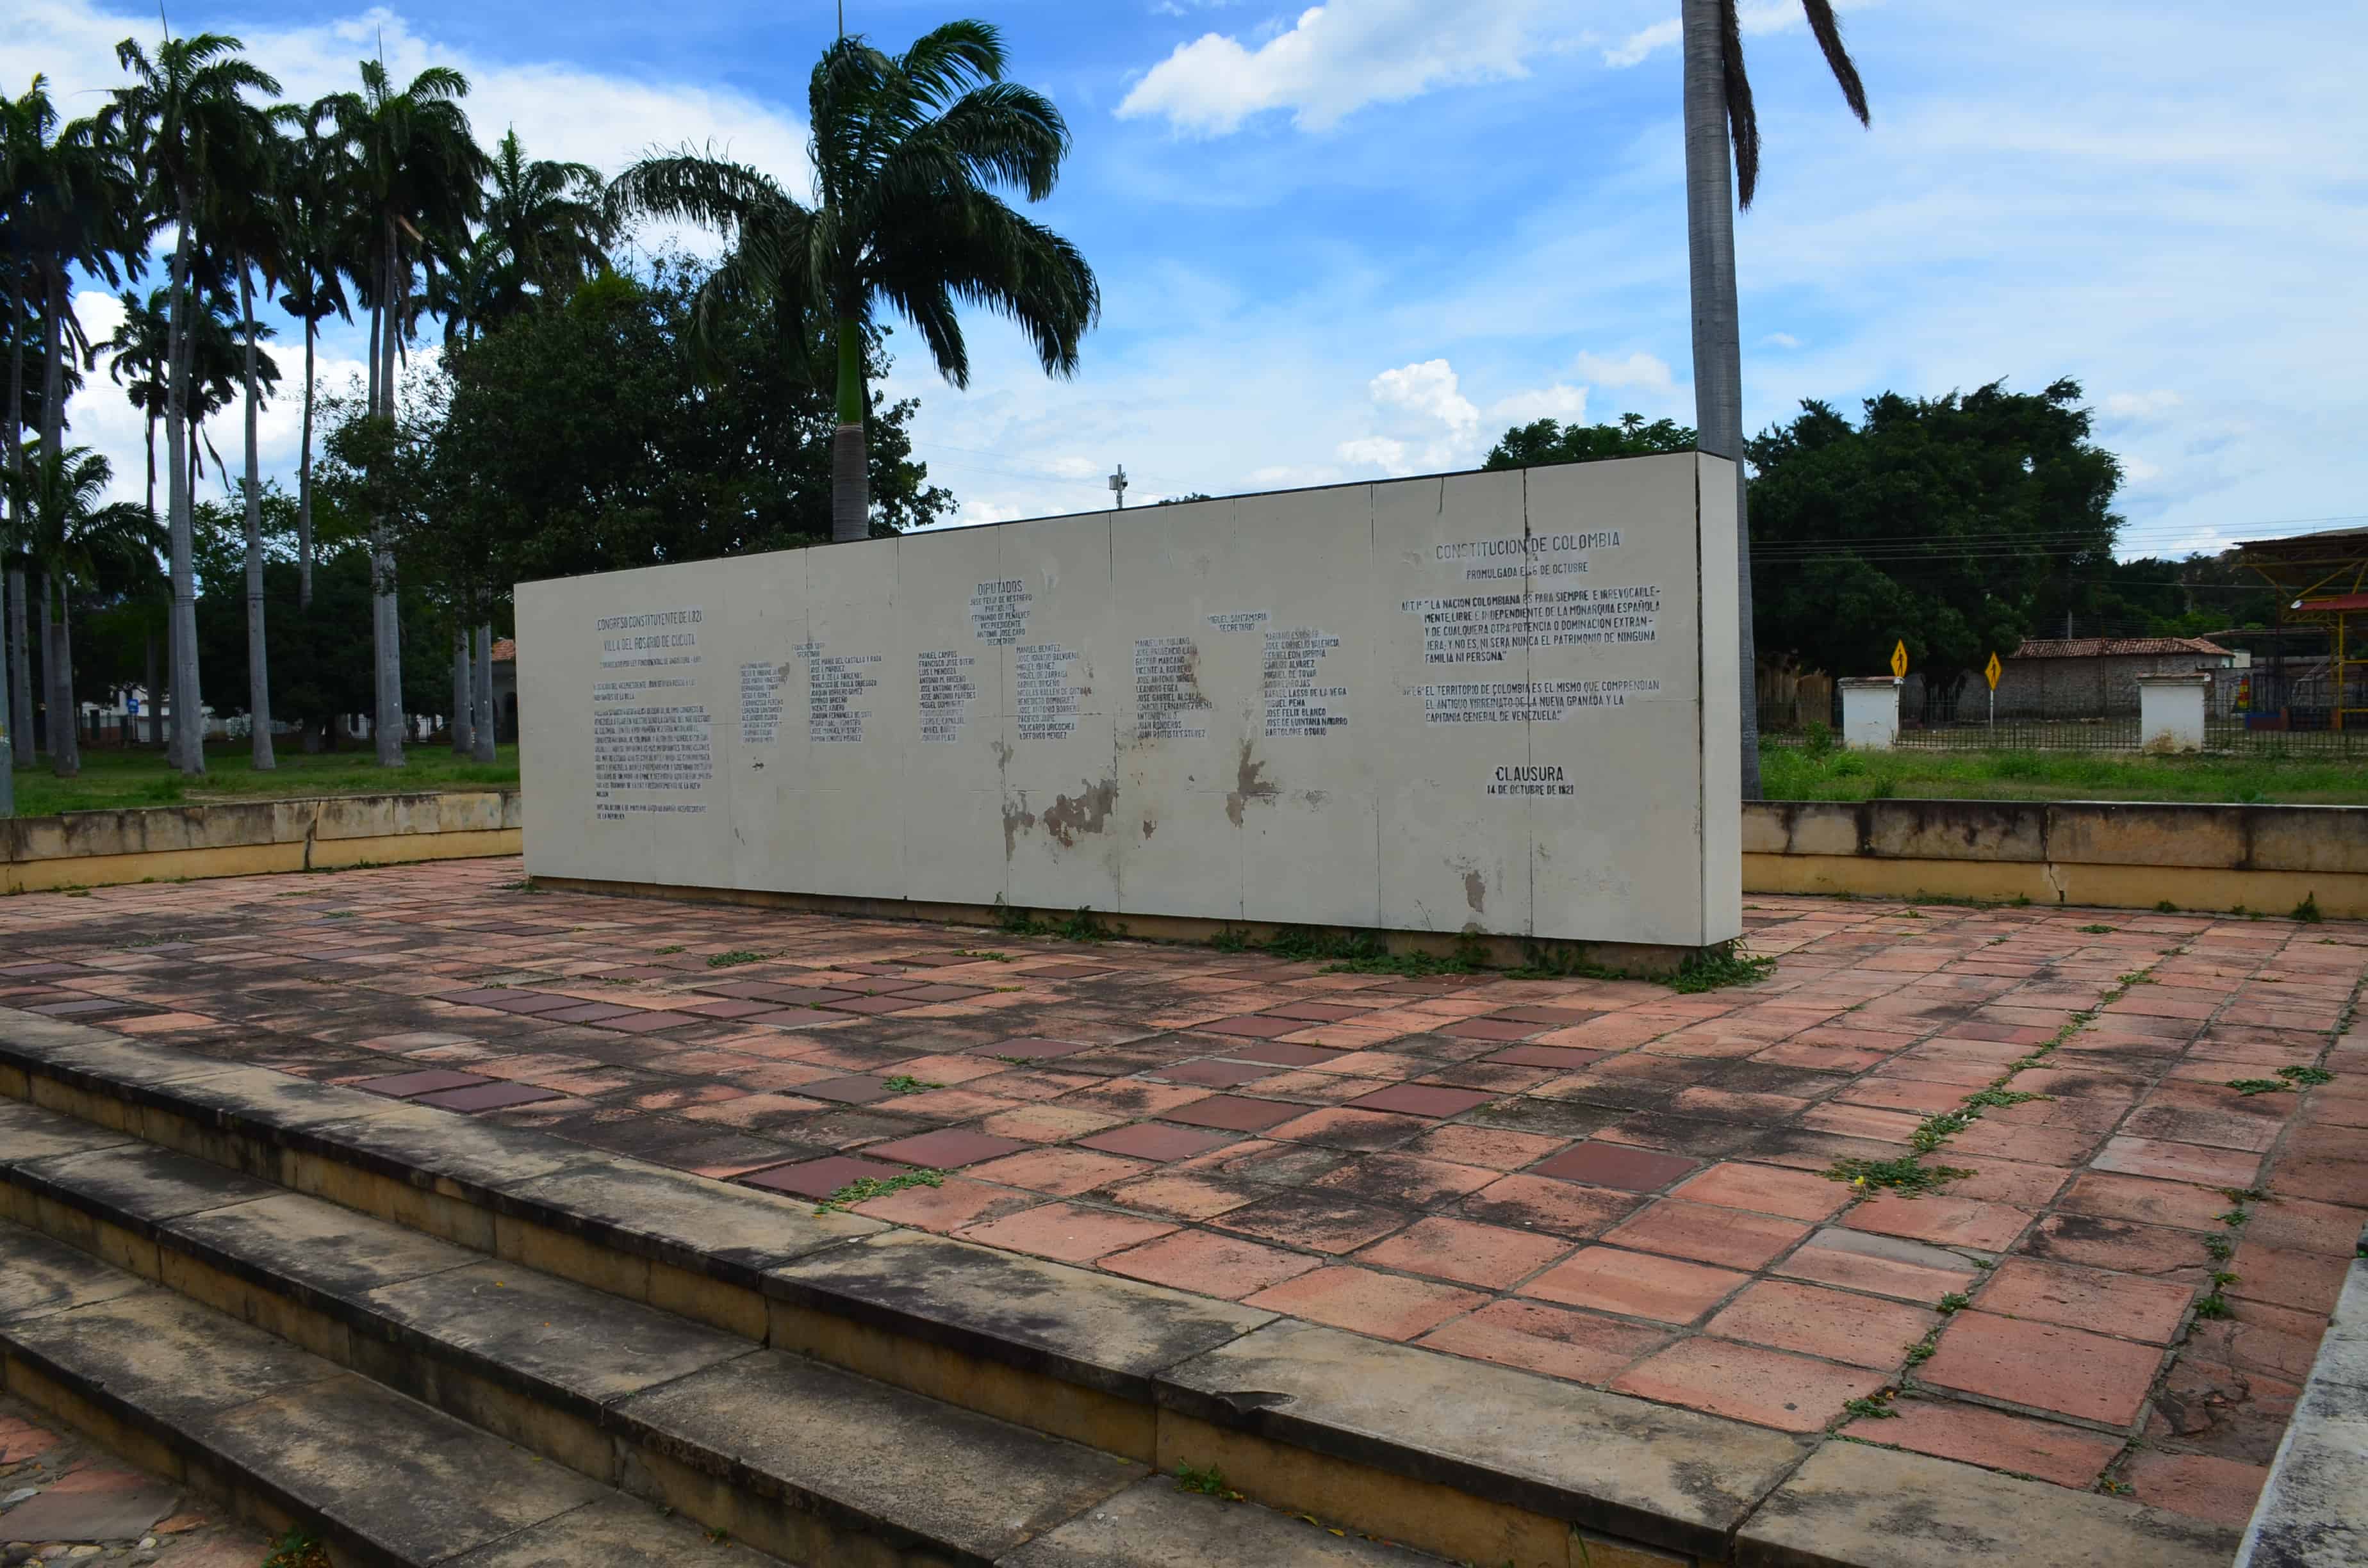 Fading monument at Gran Colombia Park